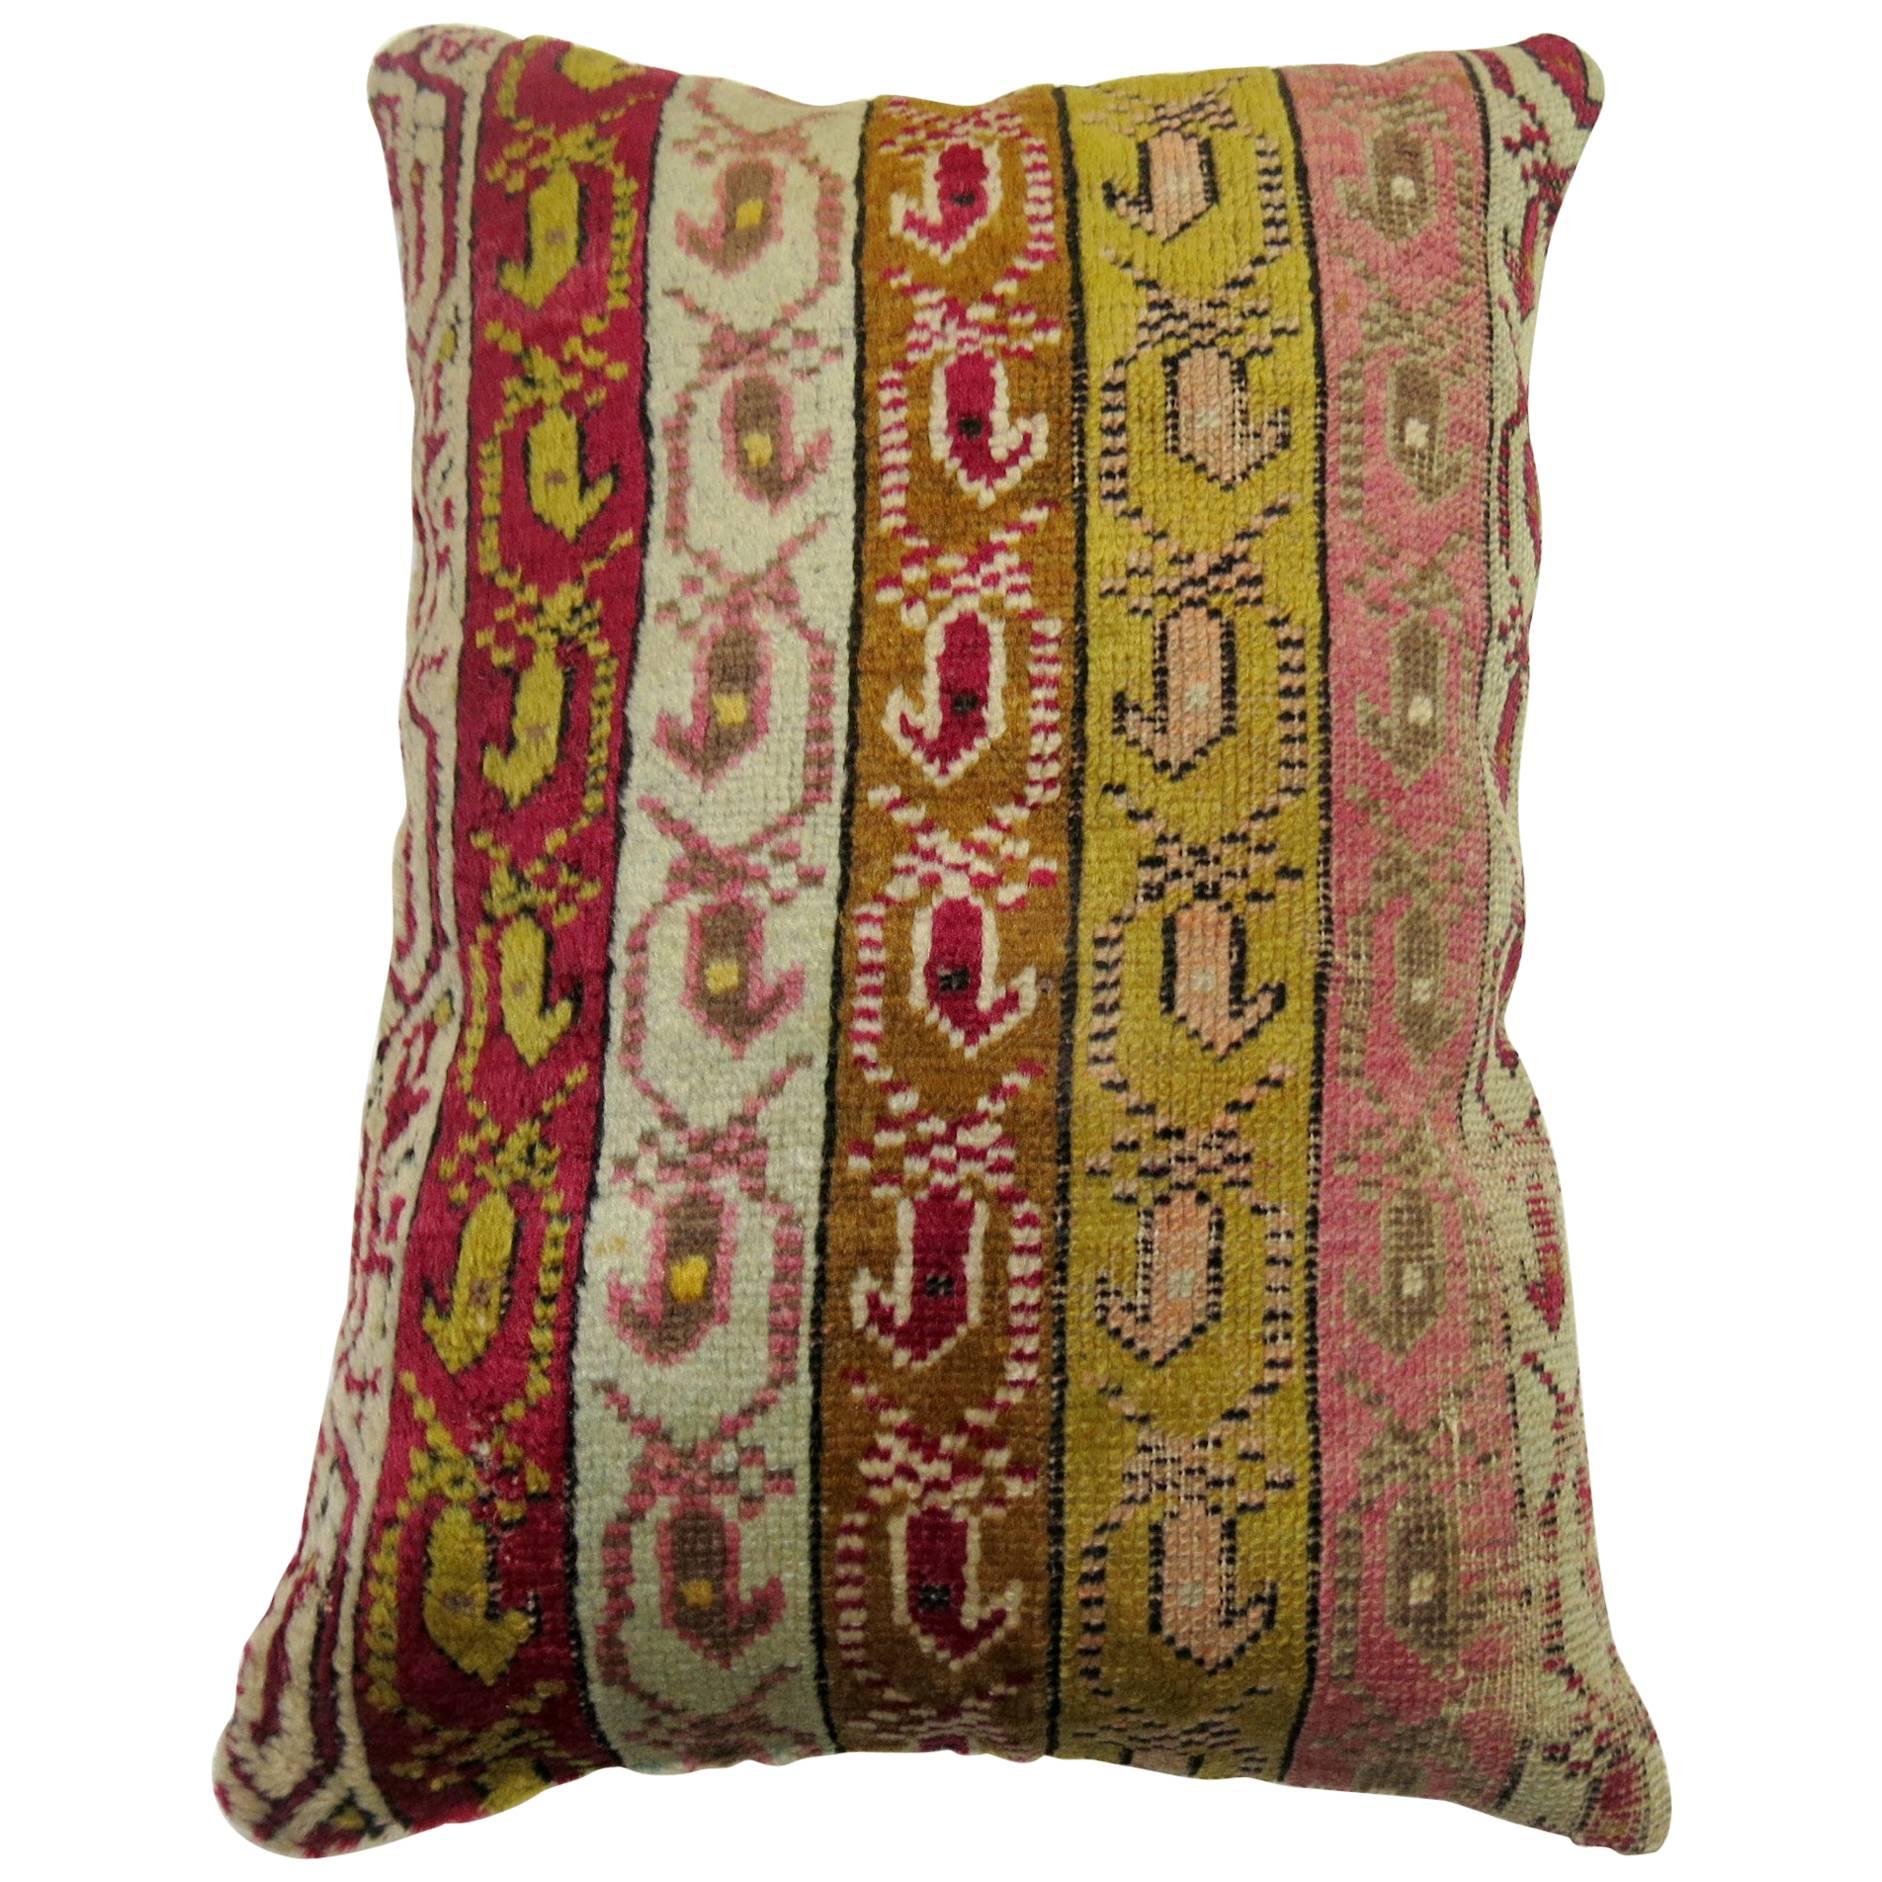 Pillow made from an early 20th century Turkish ghiordes rug.

Measures: 16